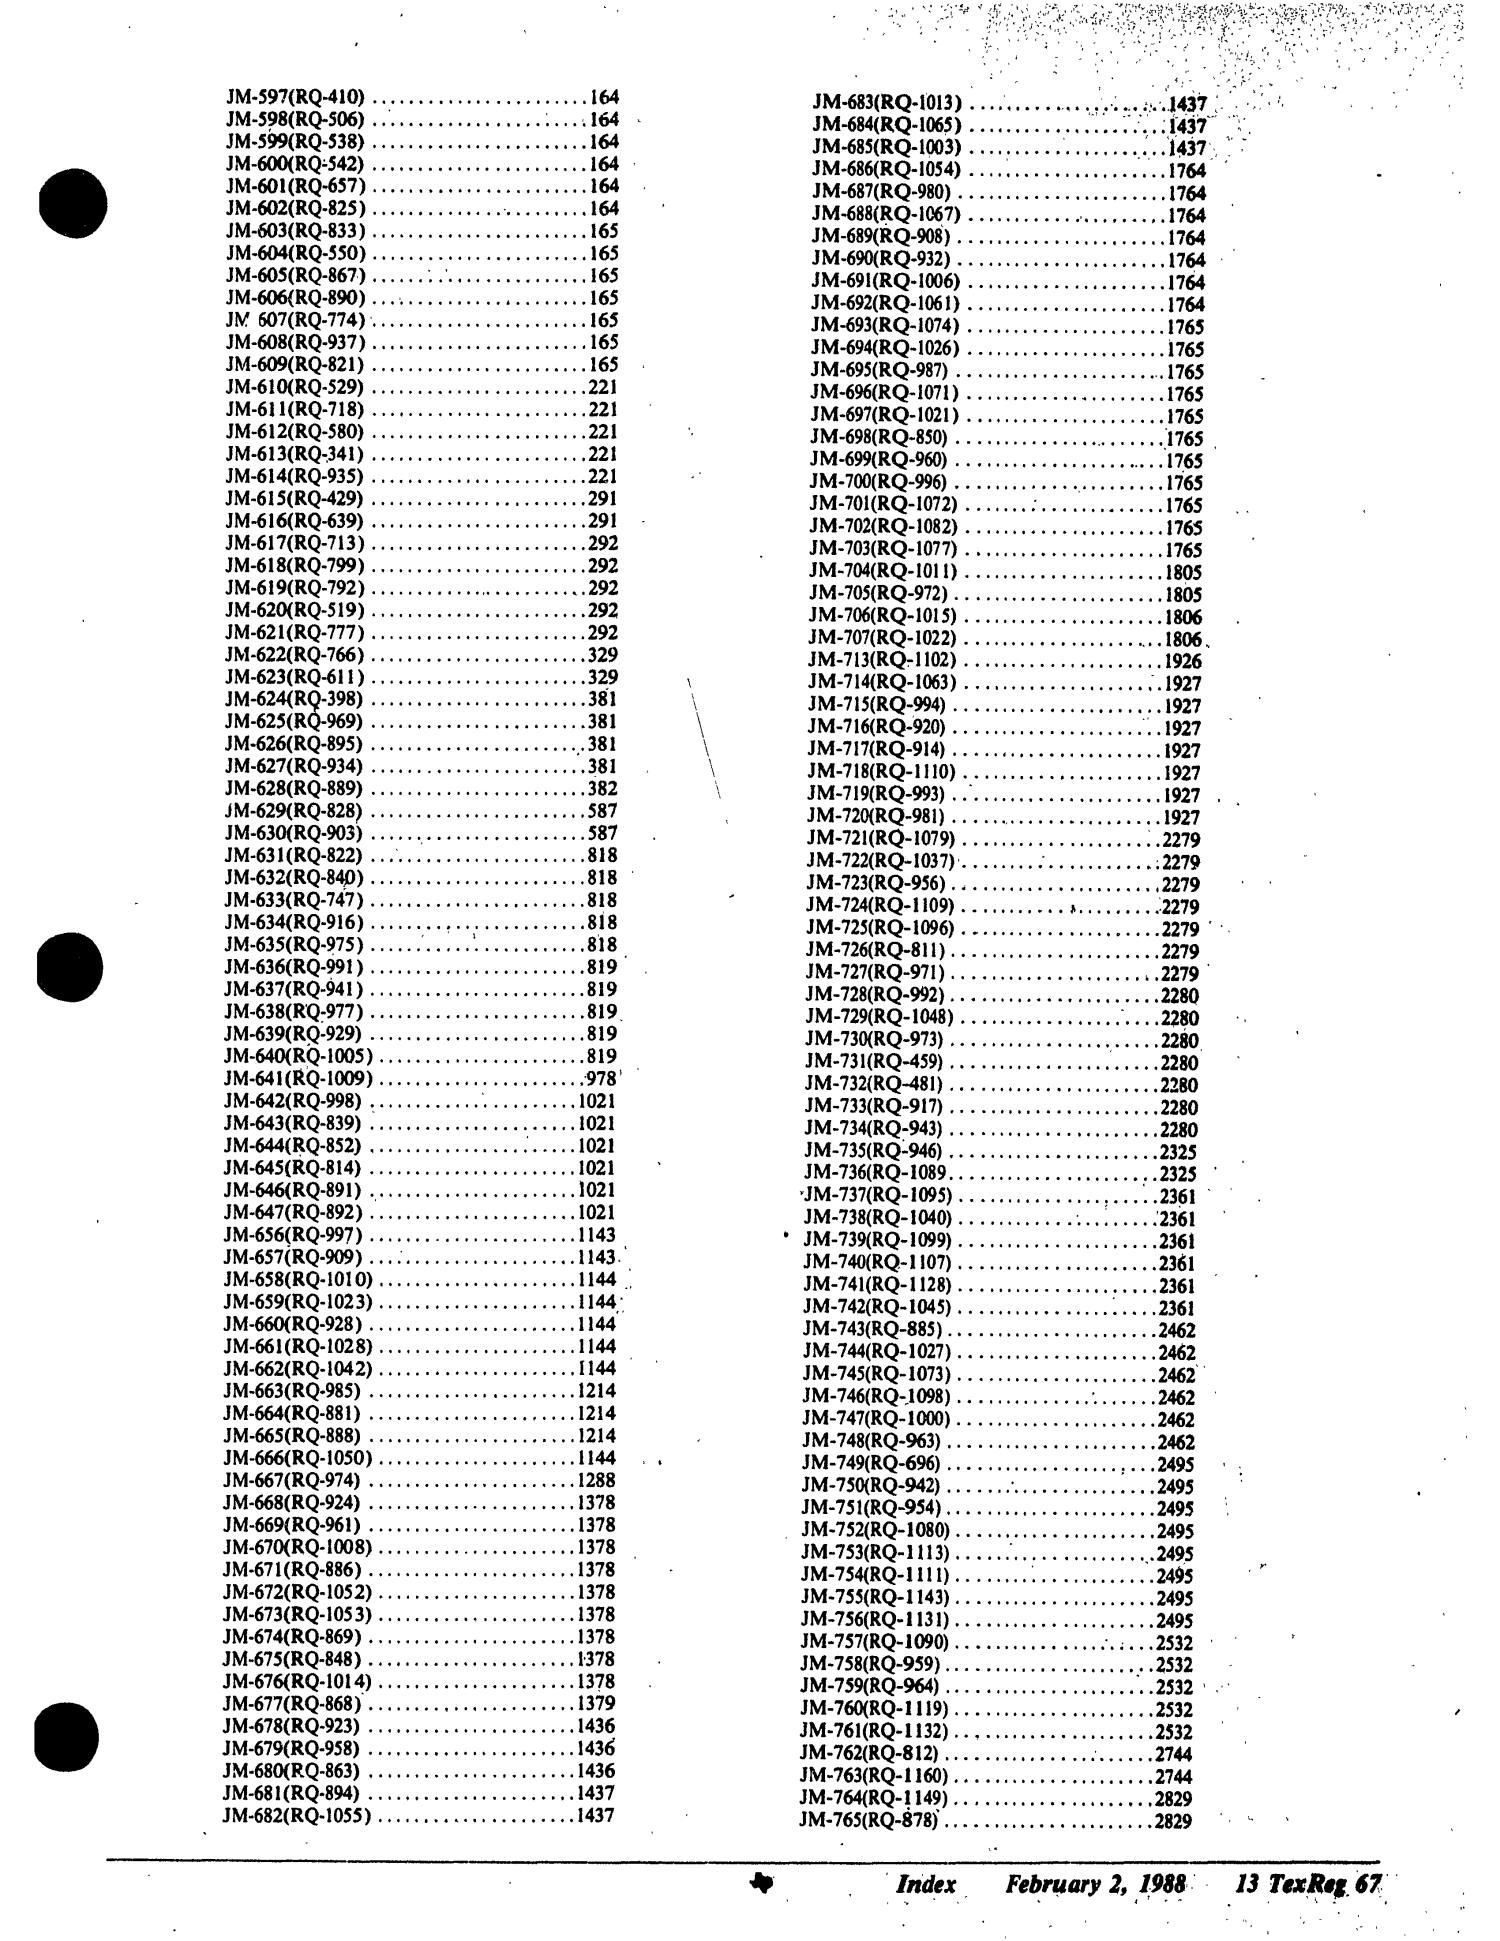 Texas Register: Annual Index January - December 1988, Volume 13 Numbers [1-96] - pages 225-350, February 3, 1989
                                                
                                                    67
                                                